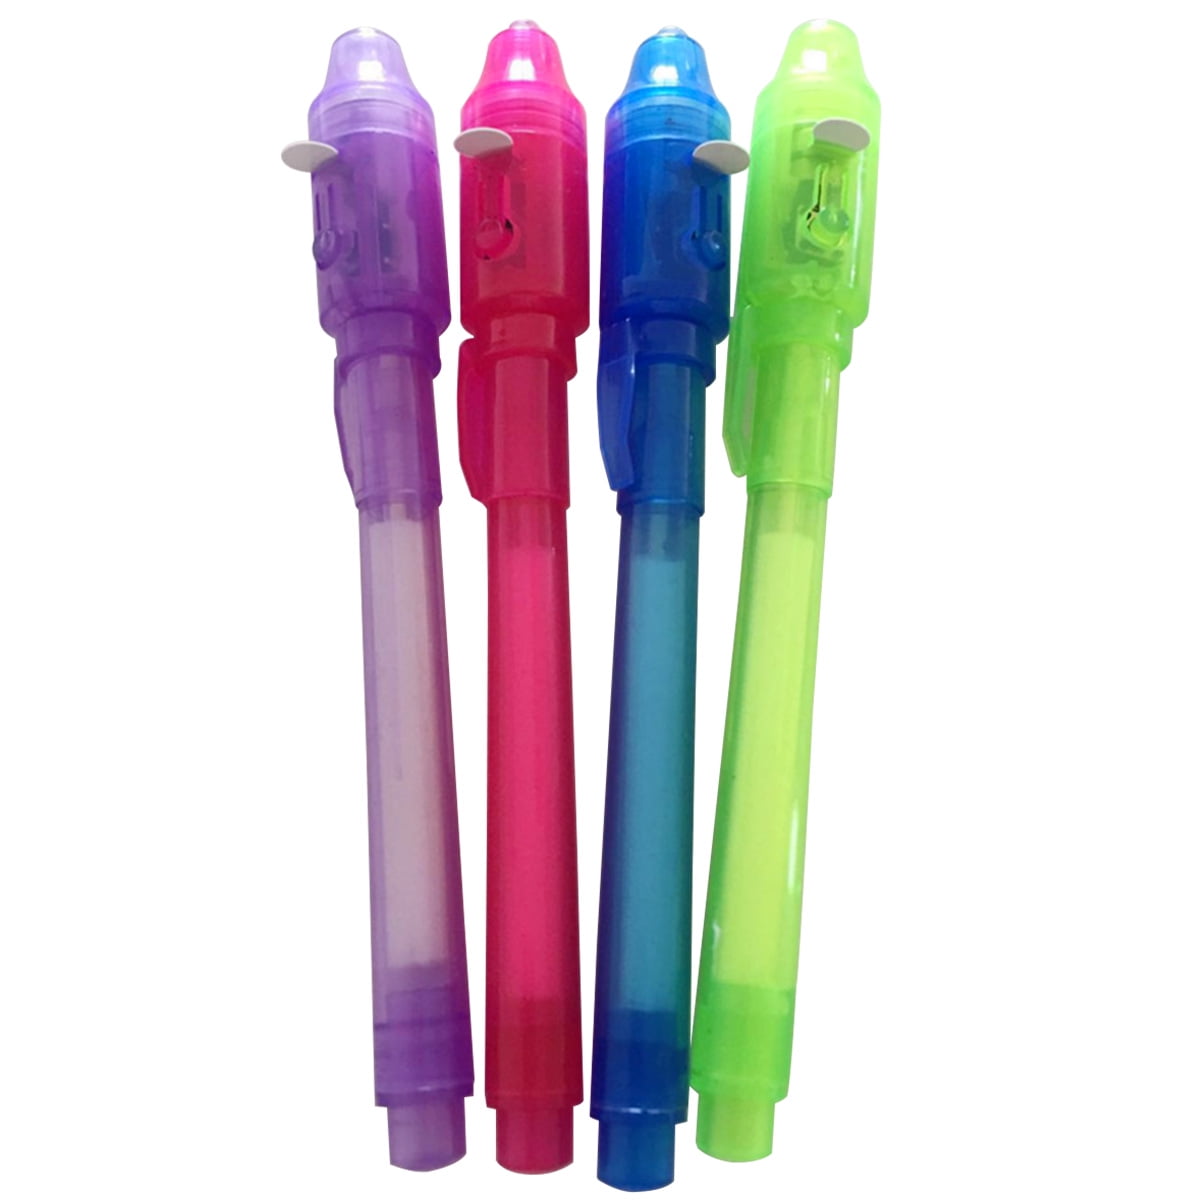 Invisible Ink Spy Pen With UV Back Light For Kids - Inspire Uplift